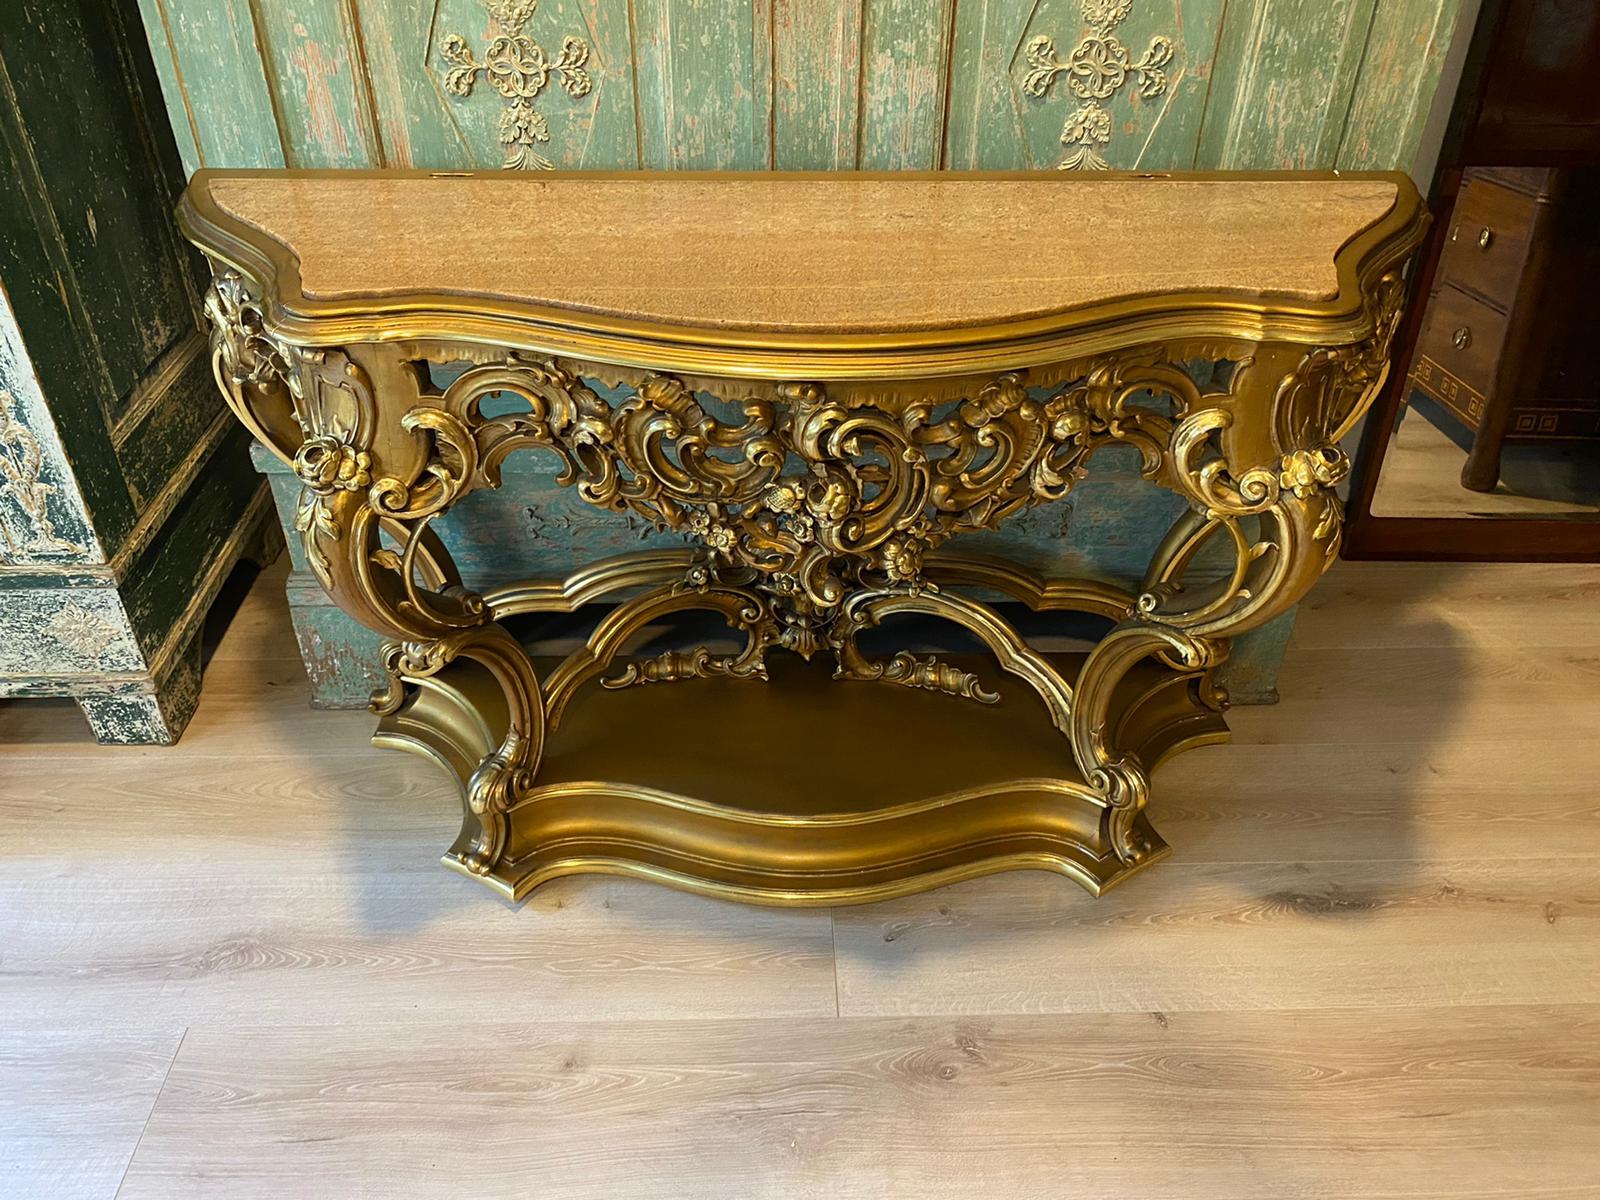 Important 19th century French mirror console with marble
Measures :console: 145cm x 90cm high
Mirror measures: 192cm x 130cm
In total, the console and mirror have a height of 282cm
Good original condition
Provenance: Roman family
If you need